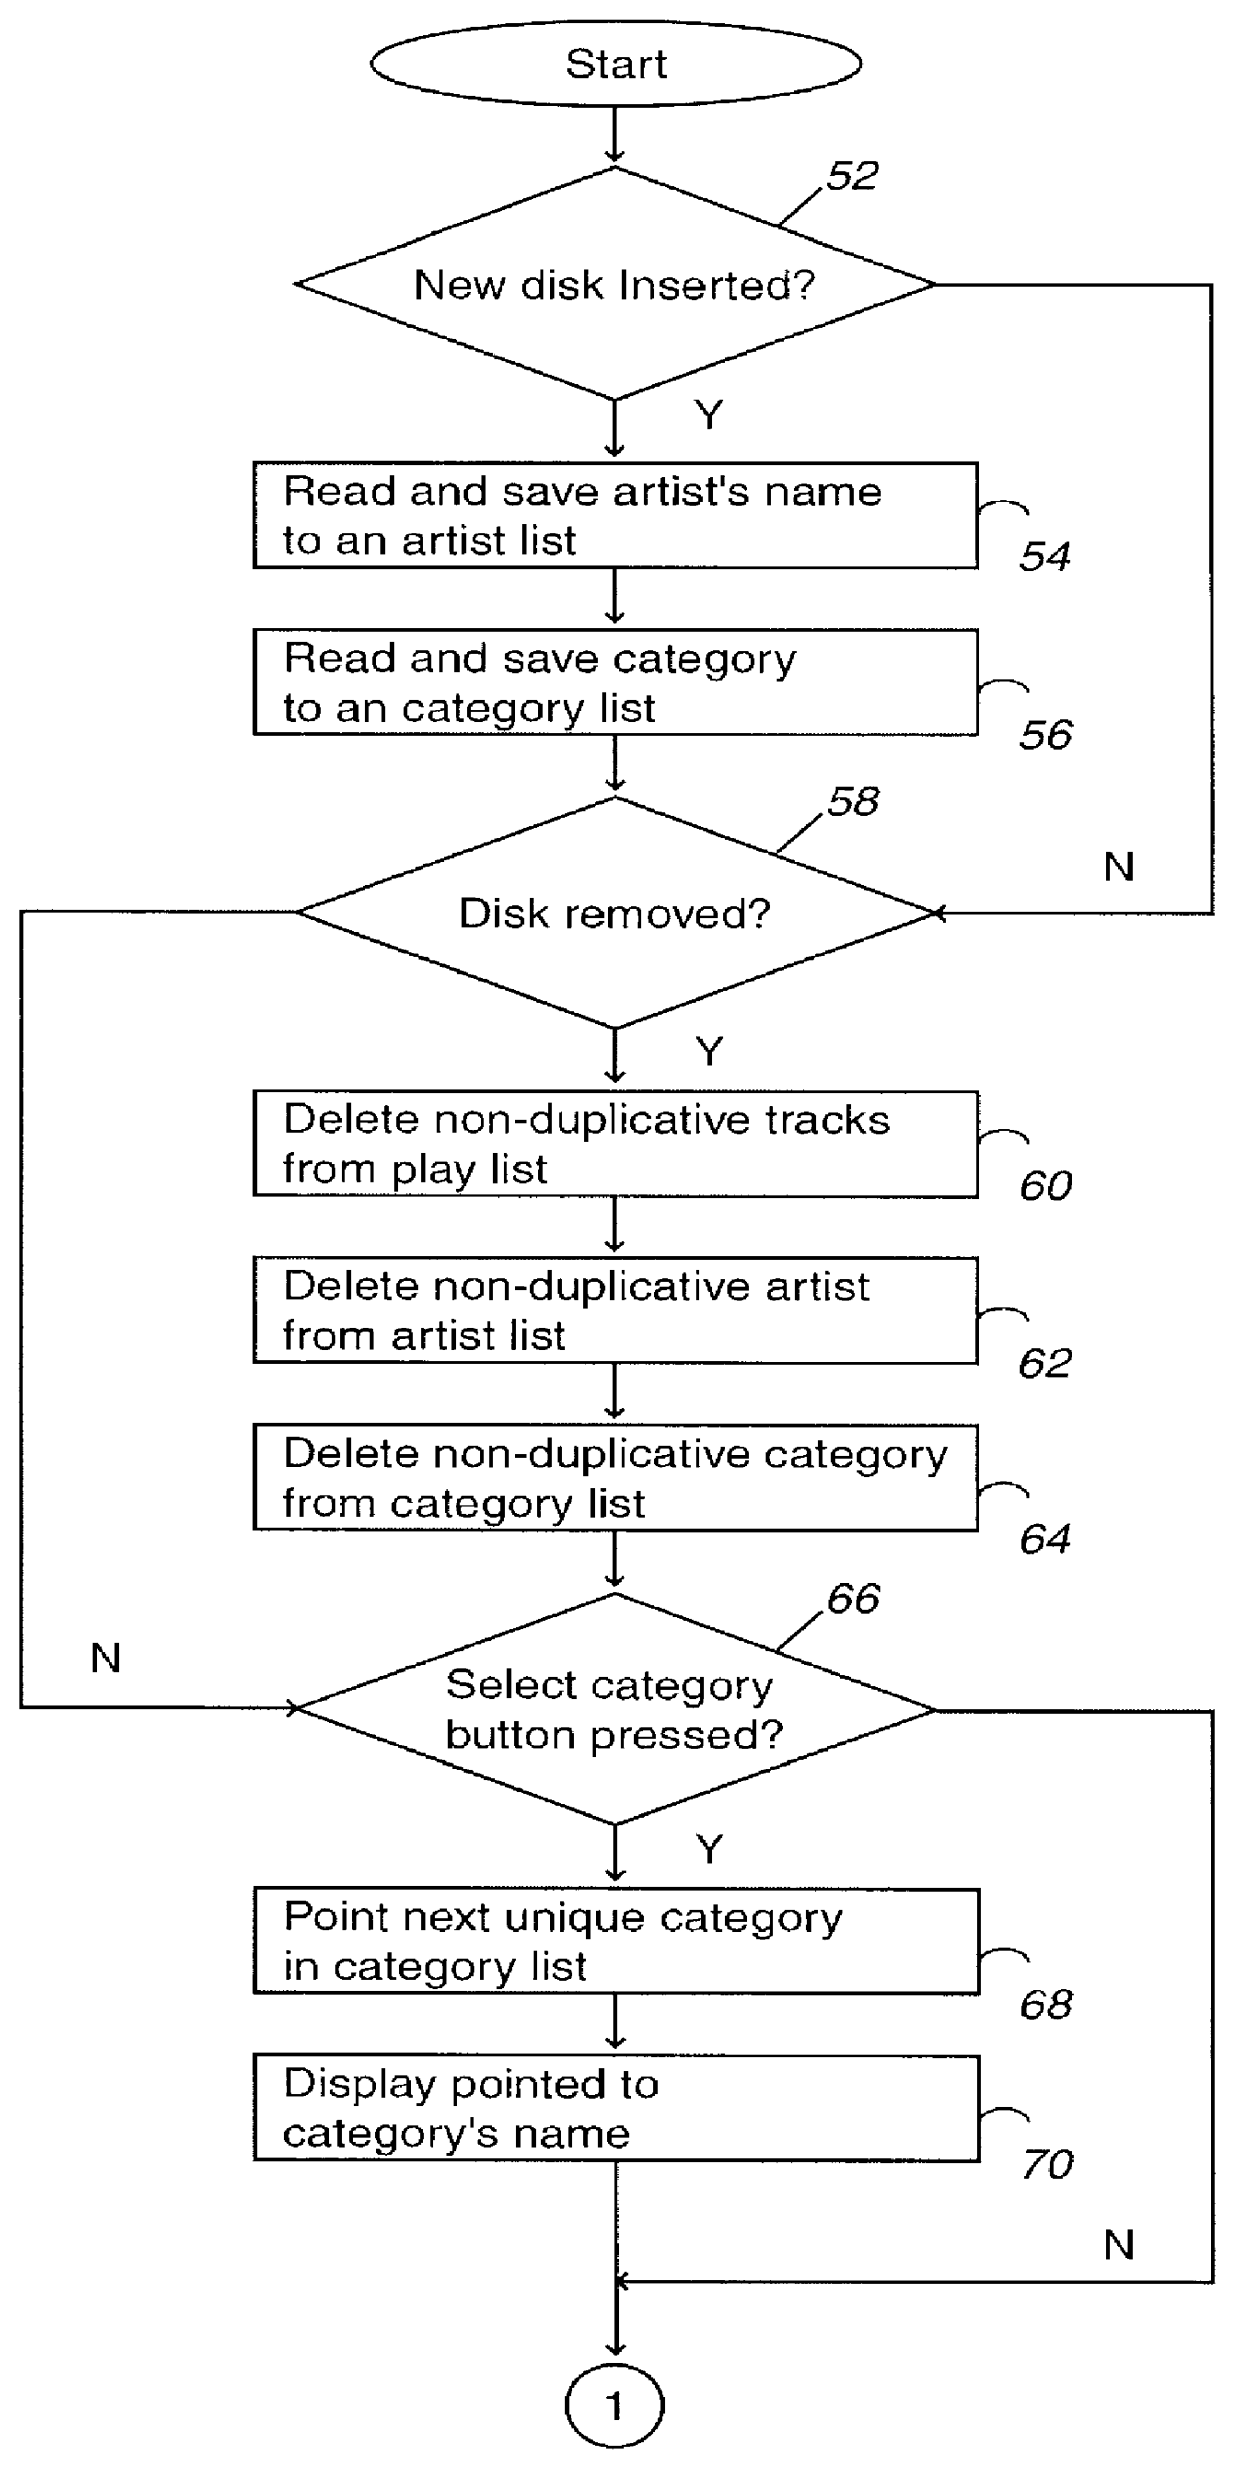 Media playback device capable of shuffled playback based on a user's preferences